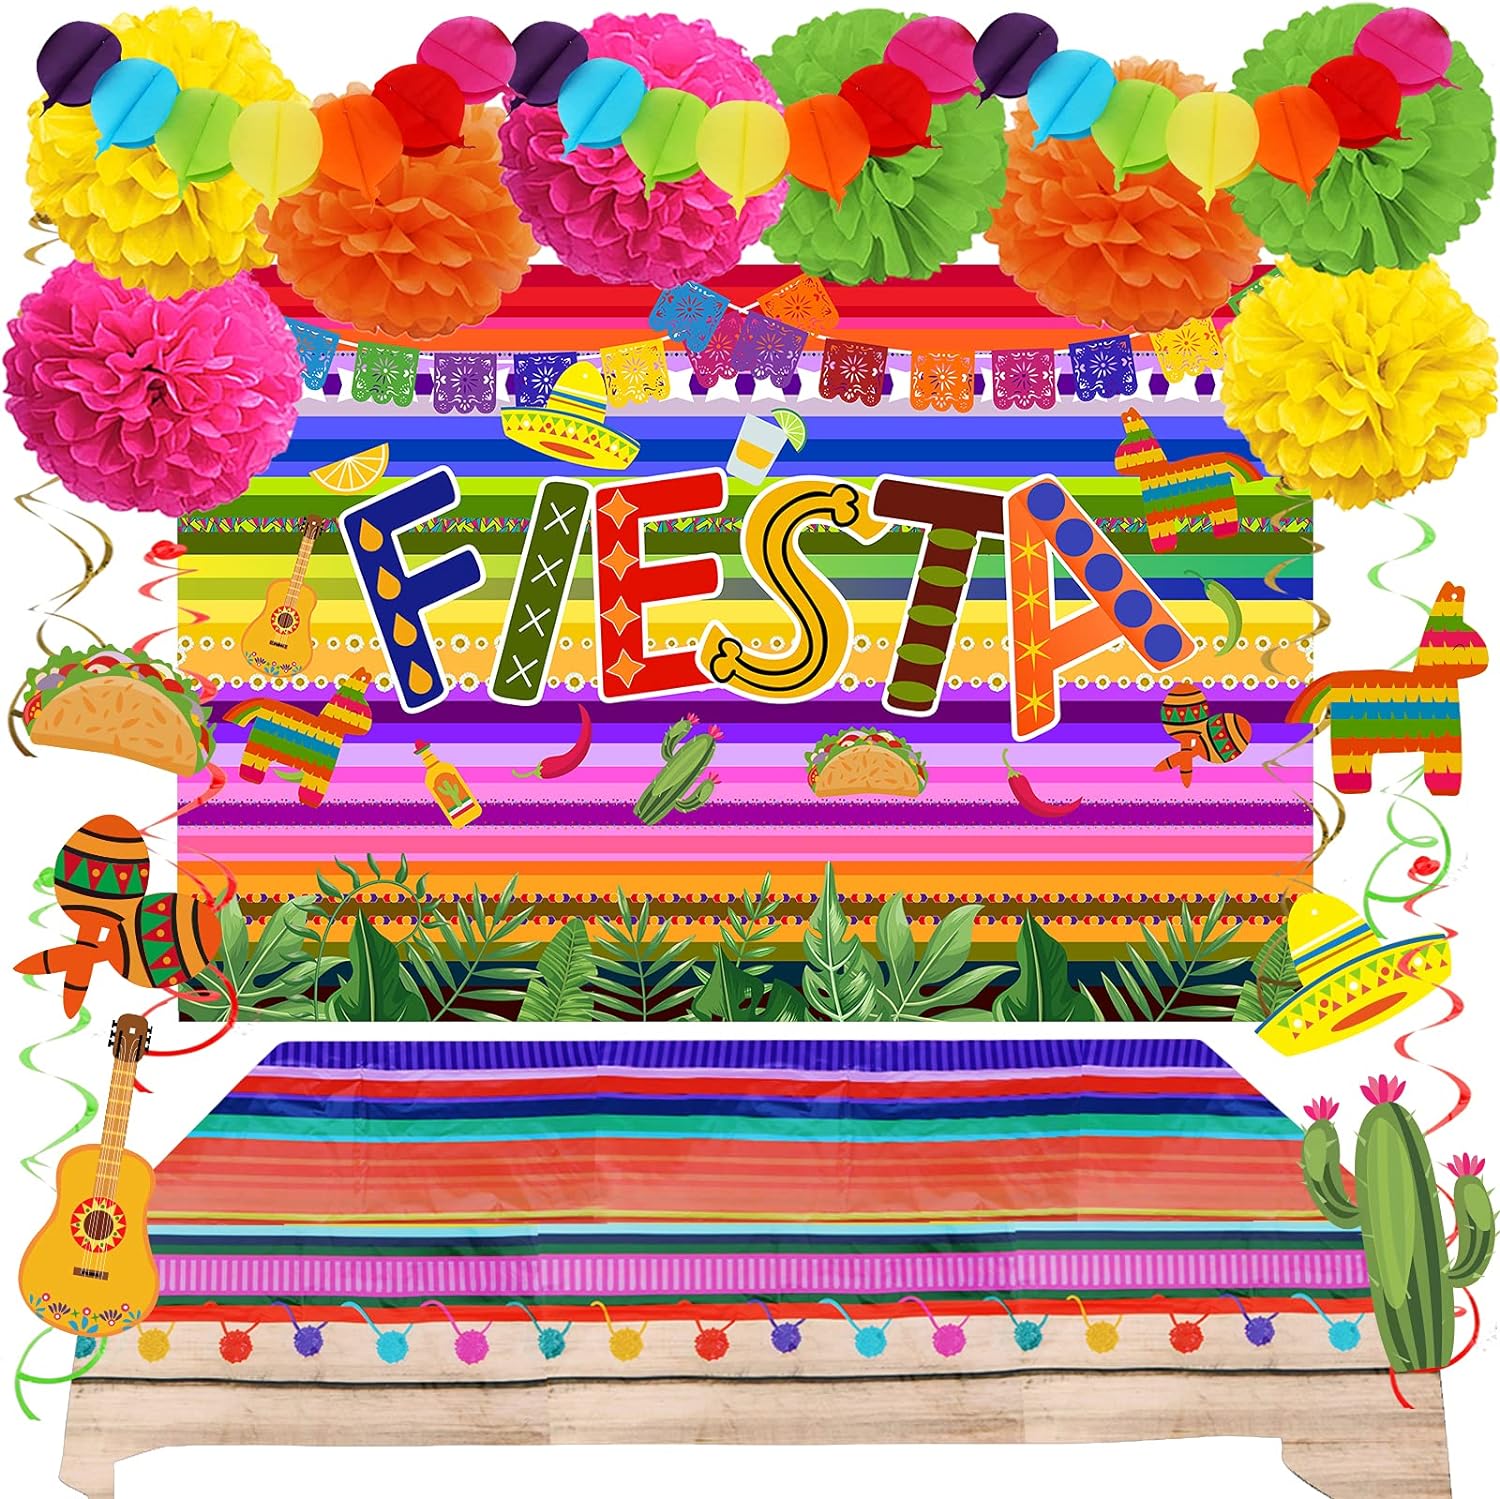 ZERODECO Party Decorations - Mexican Theme Party Backdrop, Plastic Table Cover, Multicolor Paper Pompoms, Festival Theme Swirls for Fiesta Mexicana Cinco De Mayo Luau Event Birthday Party Supplies